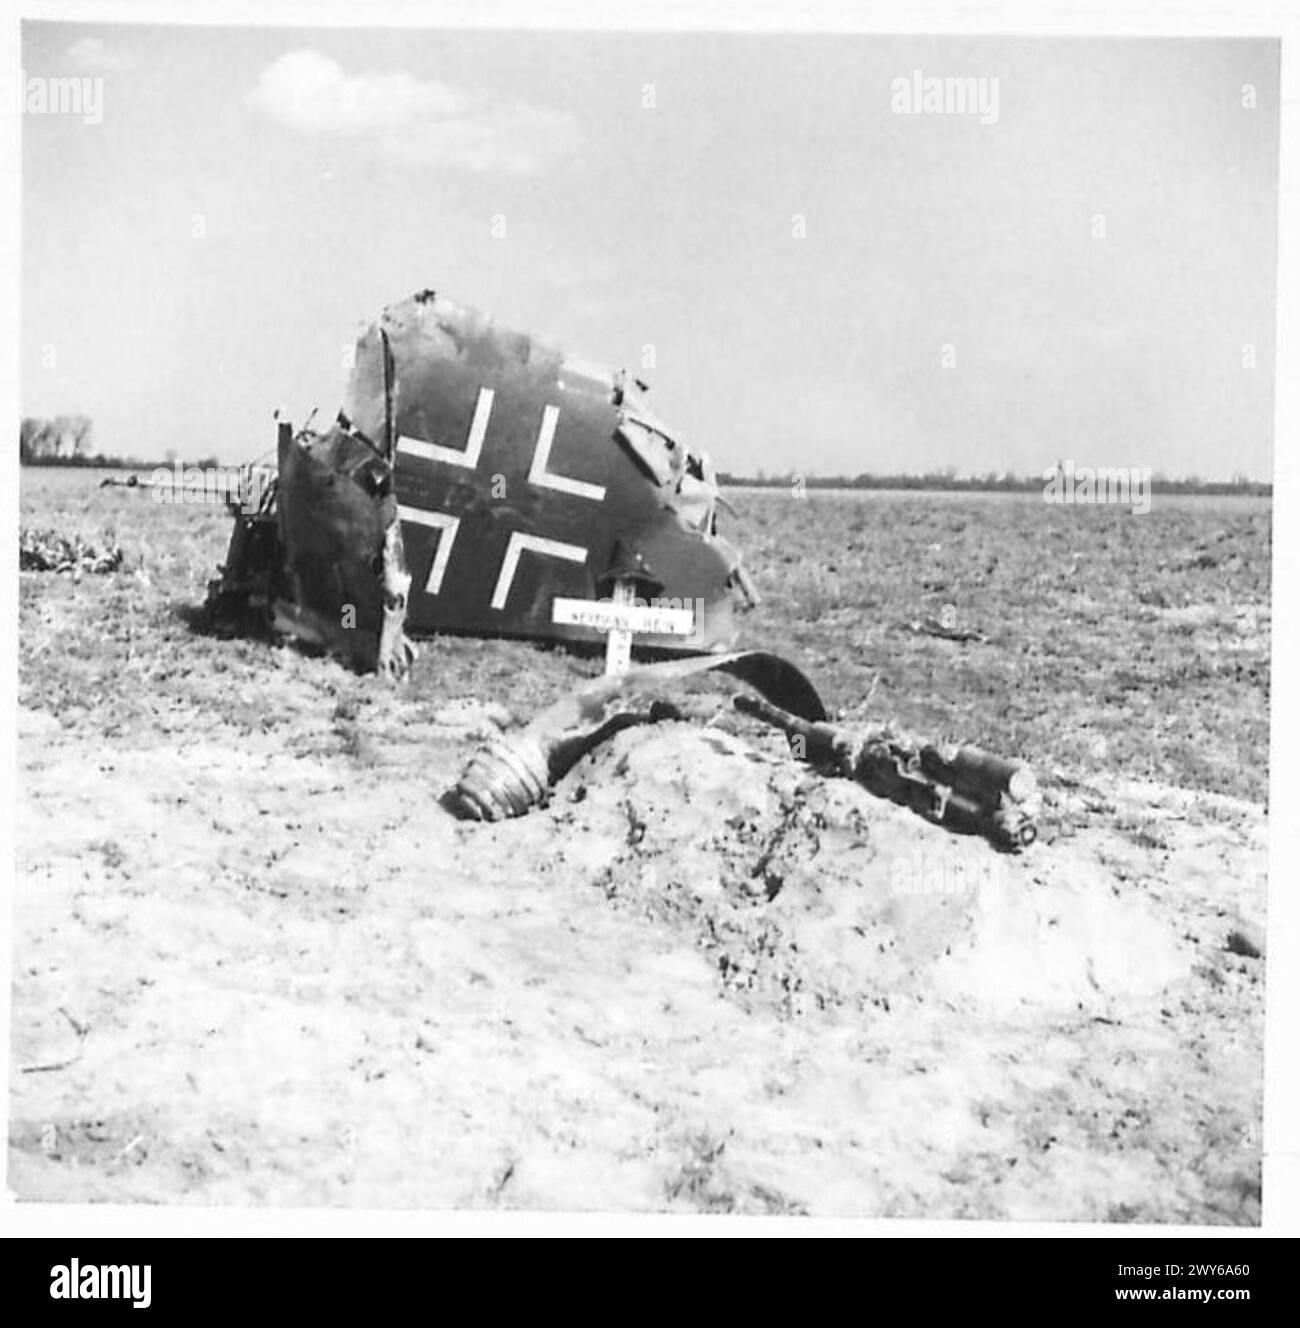 PREPARATIONS FOR THE RHINE BATTLE - A Luftwaffe pilot shot down by our anti-aircraft Bofors was called Rein, pronounced Rhine. He died and was buried within sight of the River Rhine. Parts of his machine were placed on his grave. , British Army, 21st Army Group Stock Photo